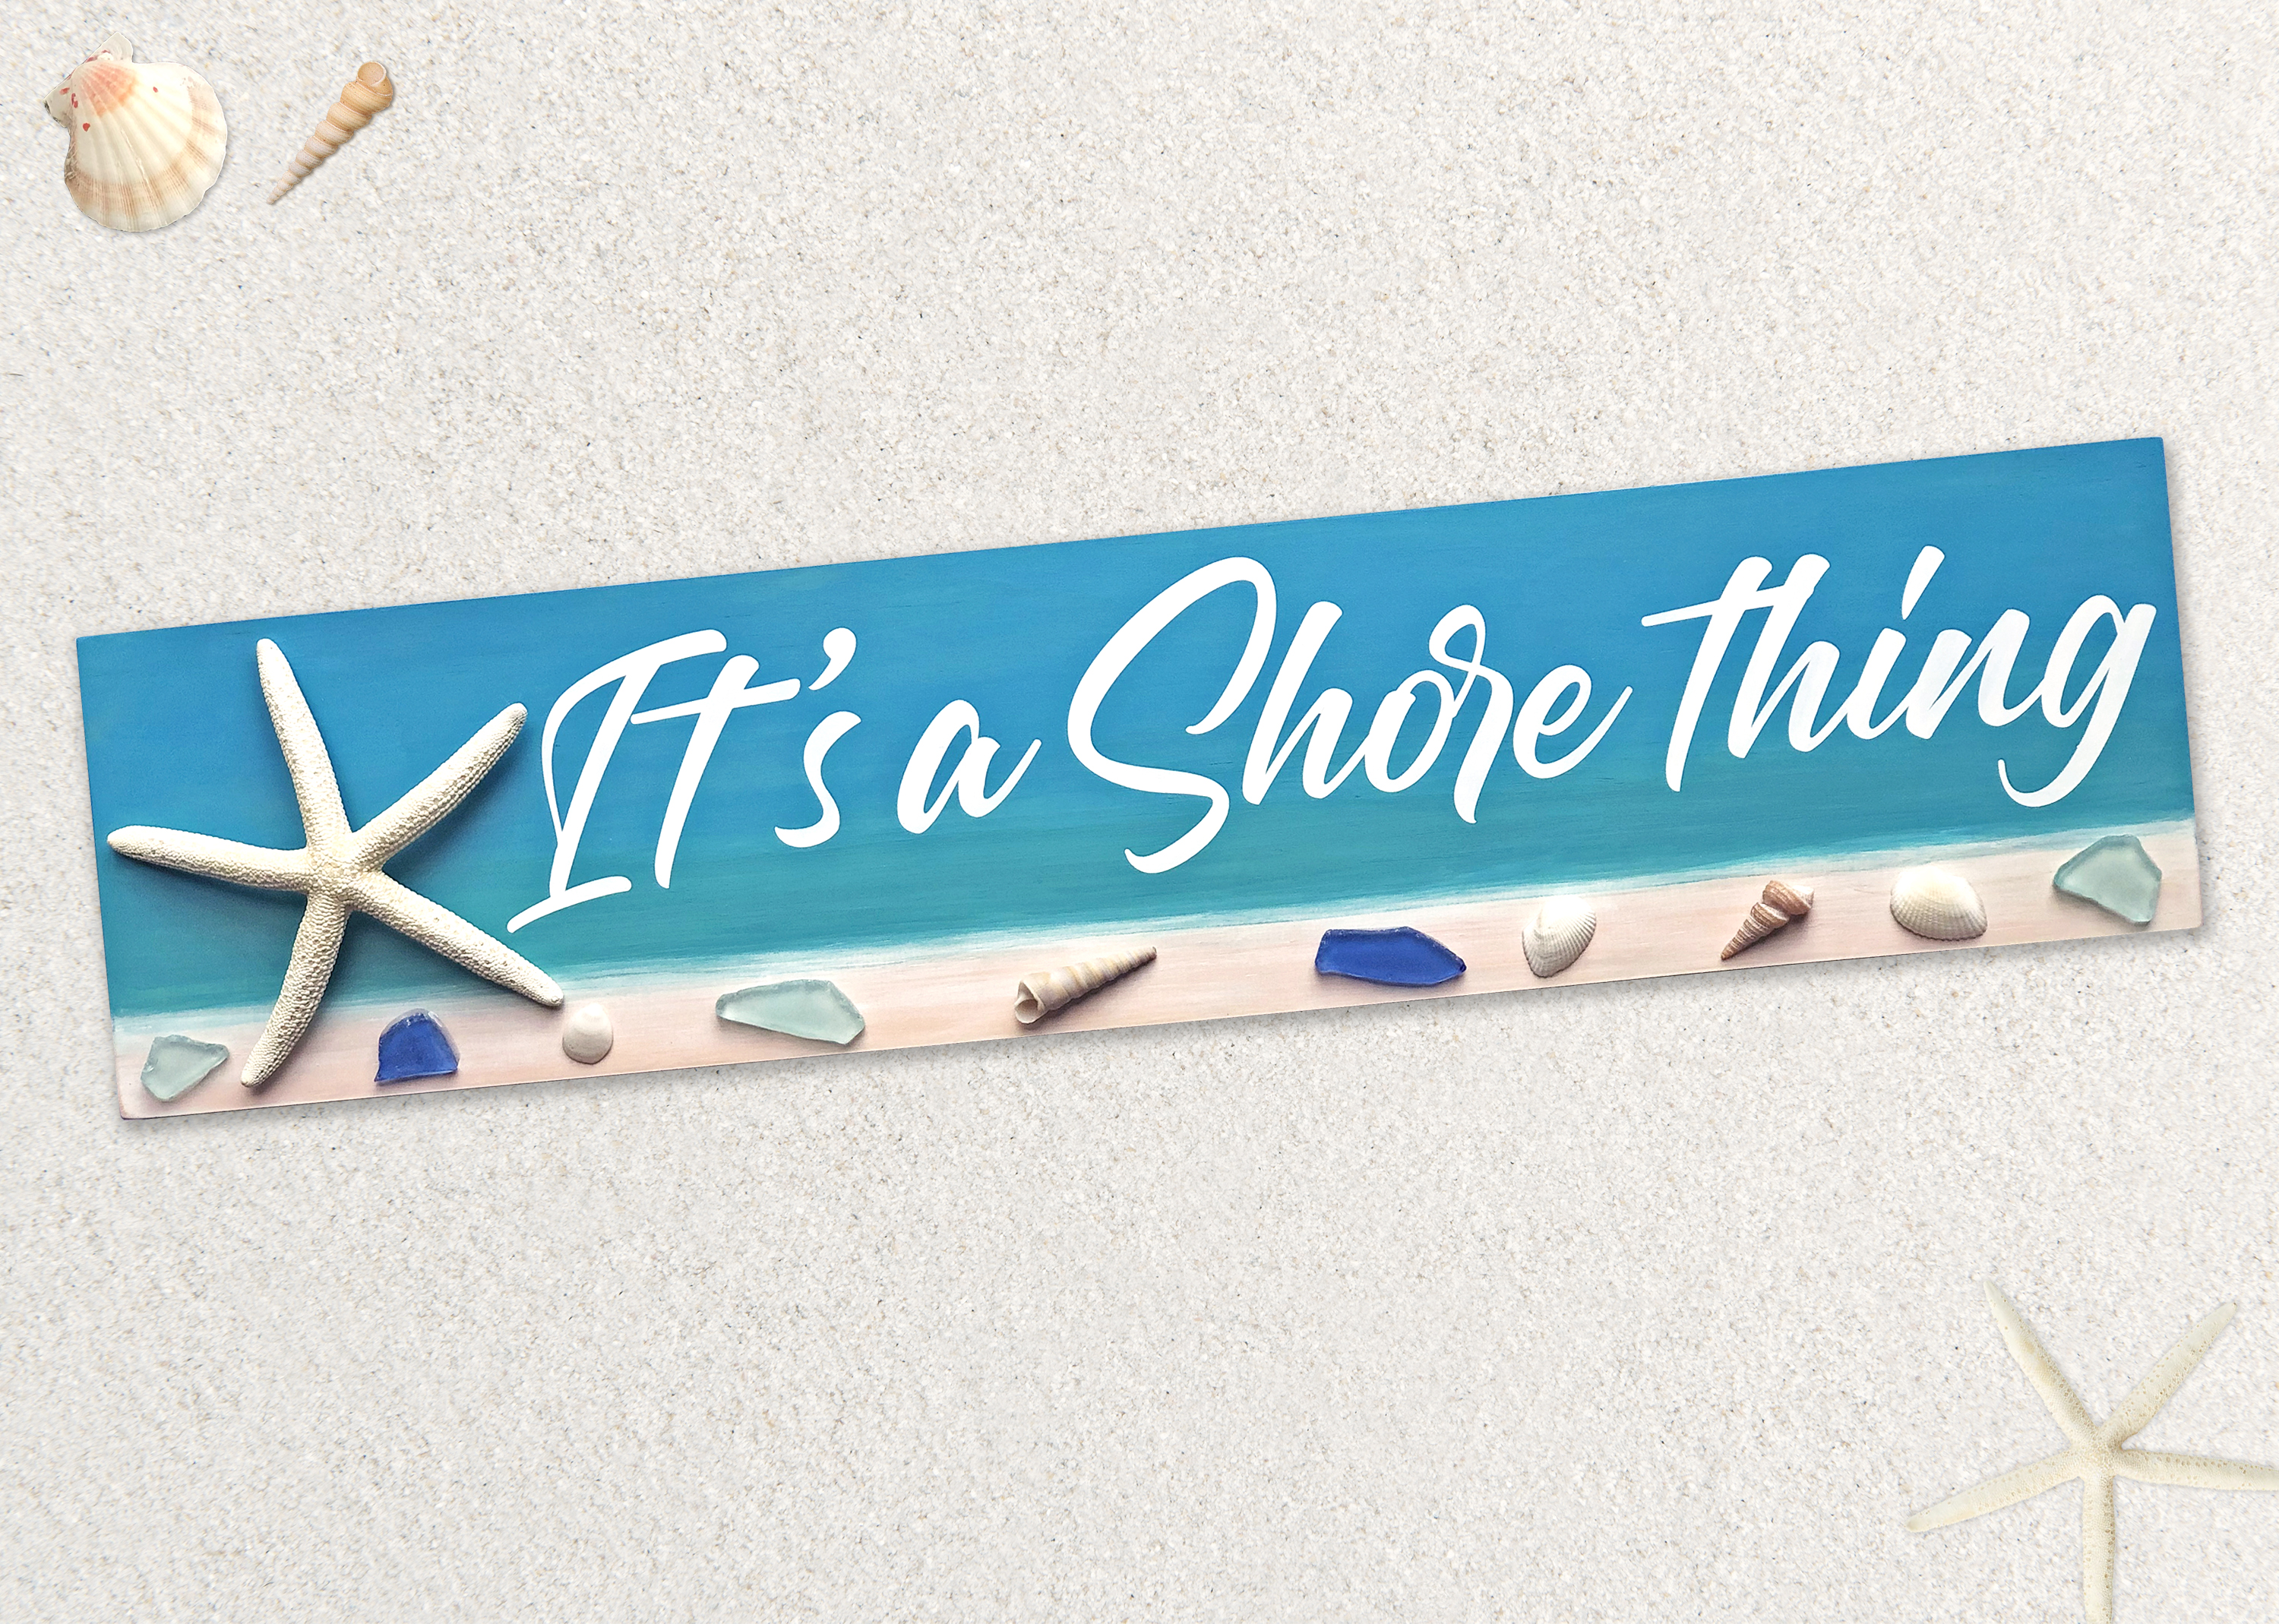 It’s a shore thing sign, Jersey Shore Sign with coastal beachy colors, watercolor effect background with sea shells and sea glass and a large starfish, Jersey Shore Decor, Summer Decor, Coastal Decor, Summer Signs, Watercolor theme background for beach house